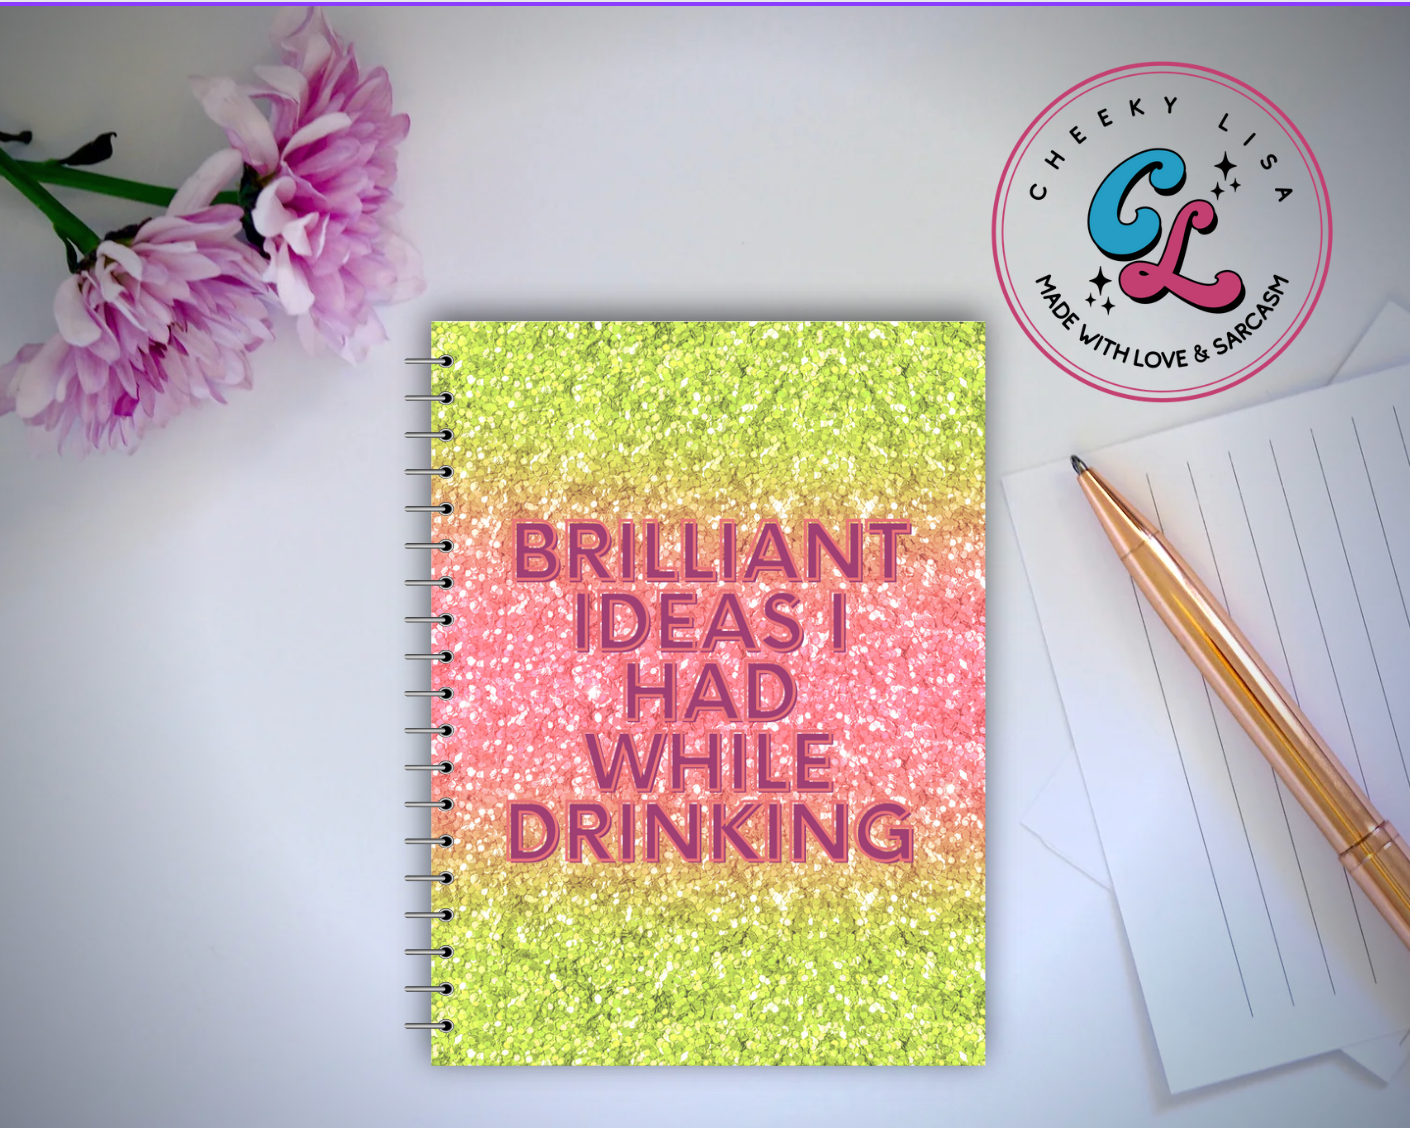 Brilliant Ideas I Had While Drinking Notebook